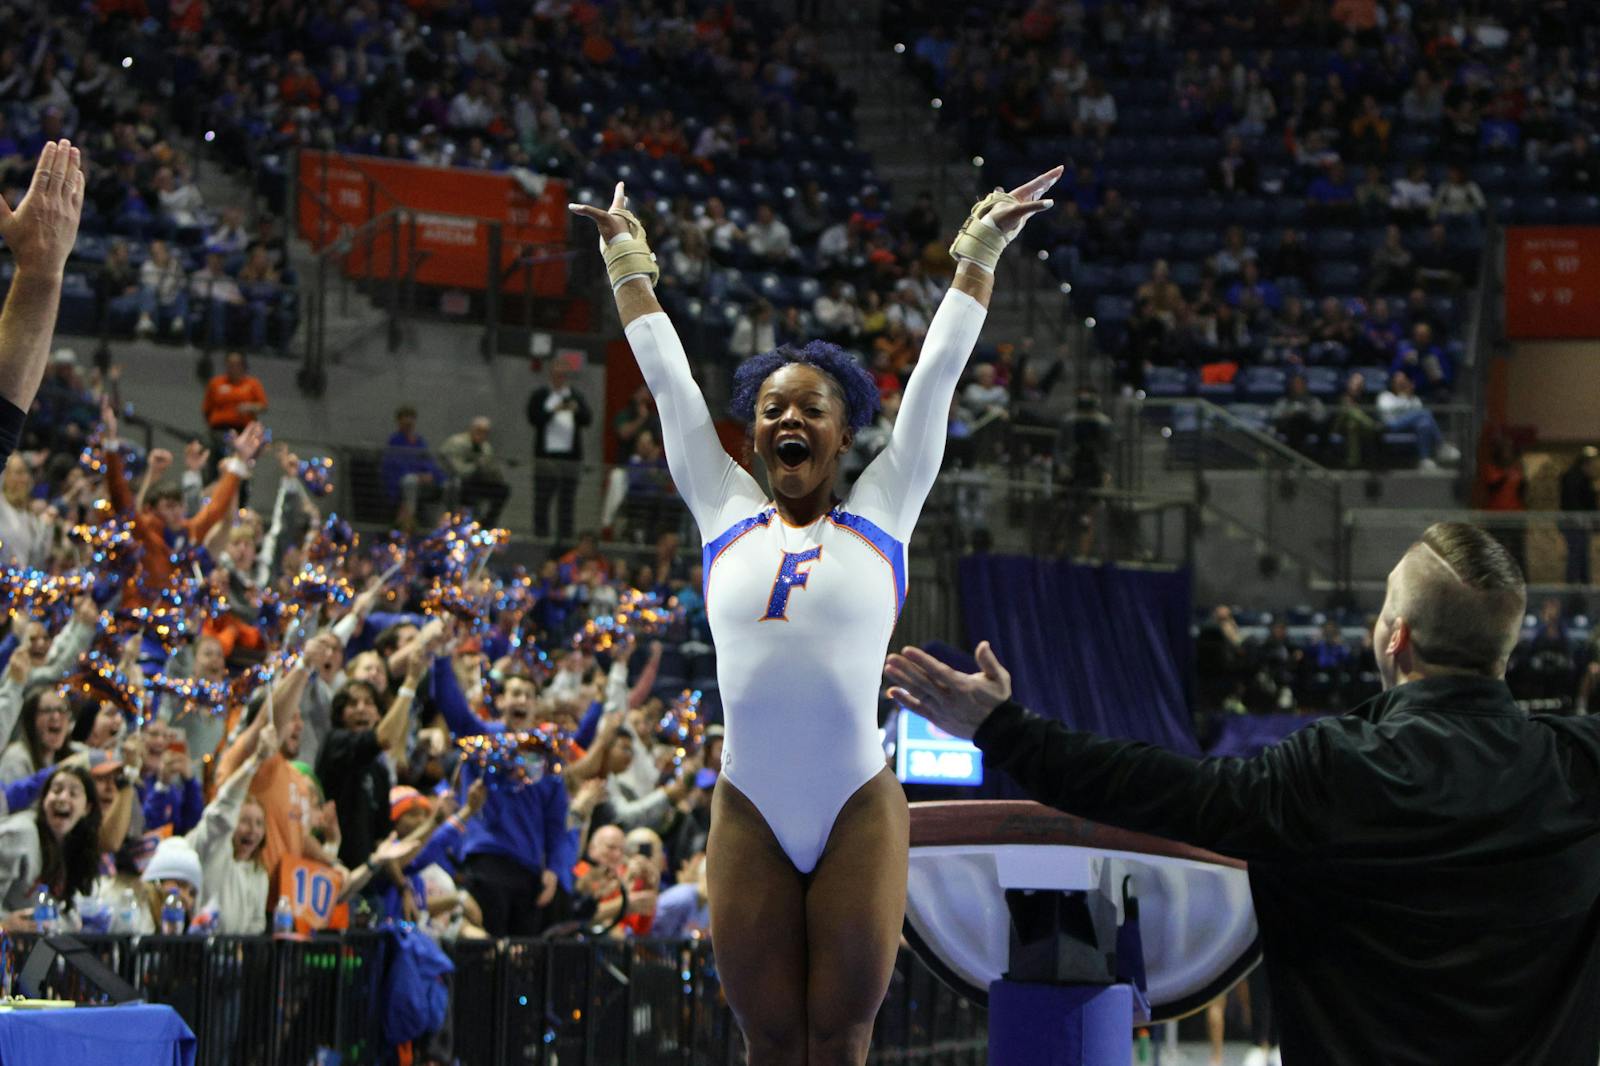 Florida gymnastics lives up to lofty expectations in front of record